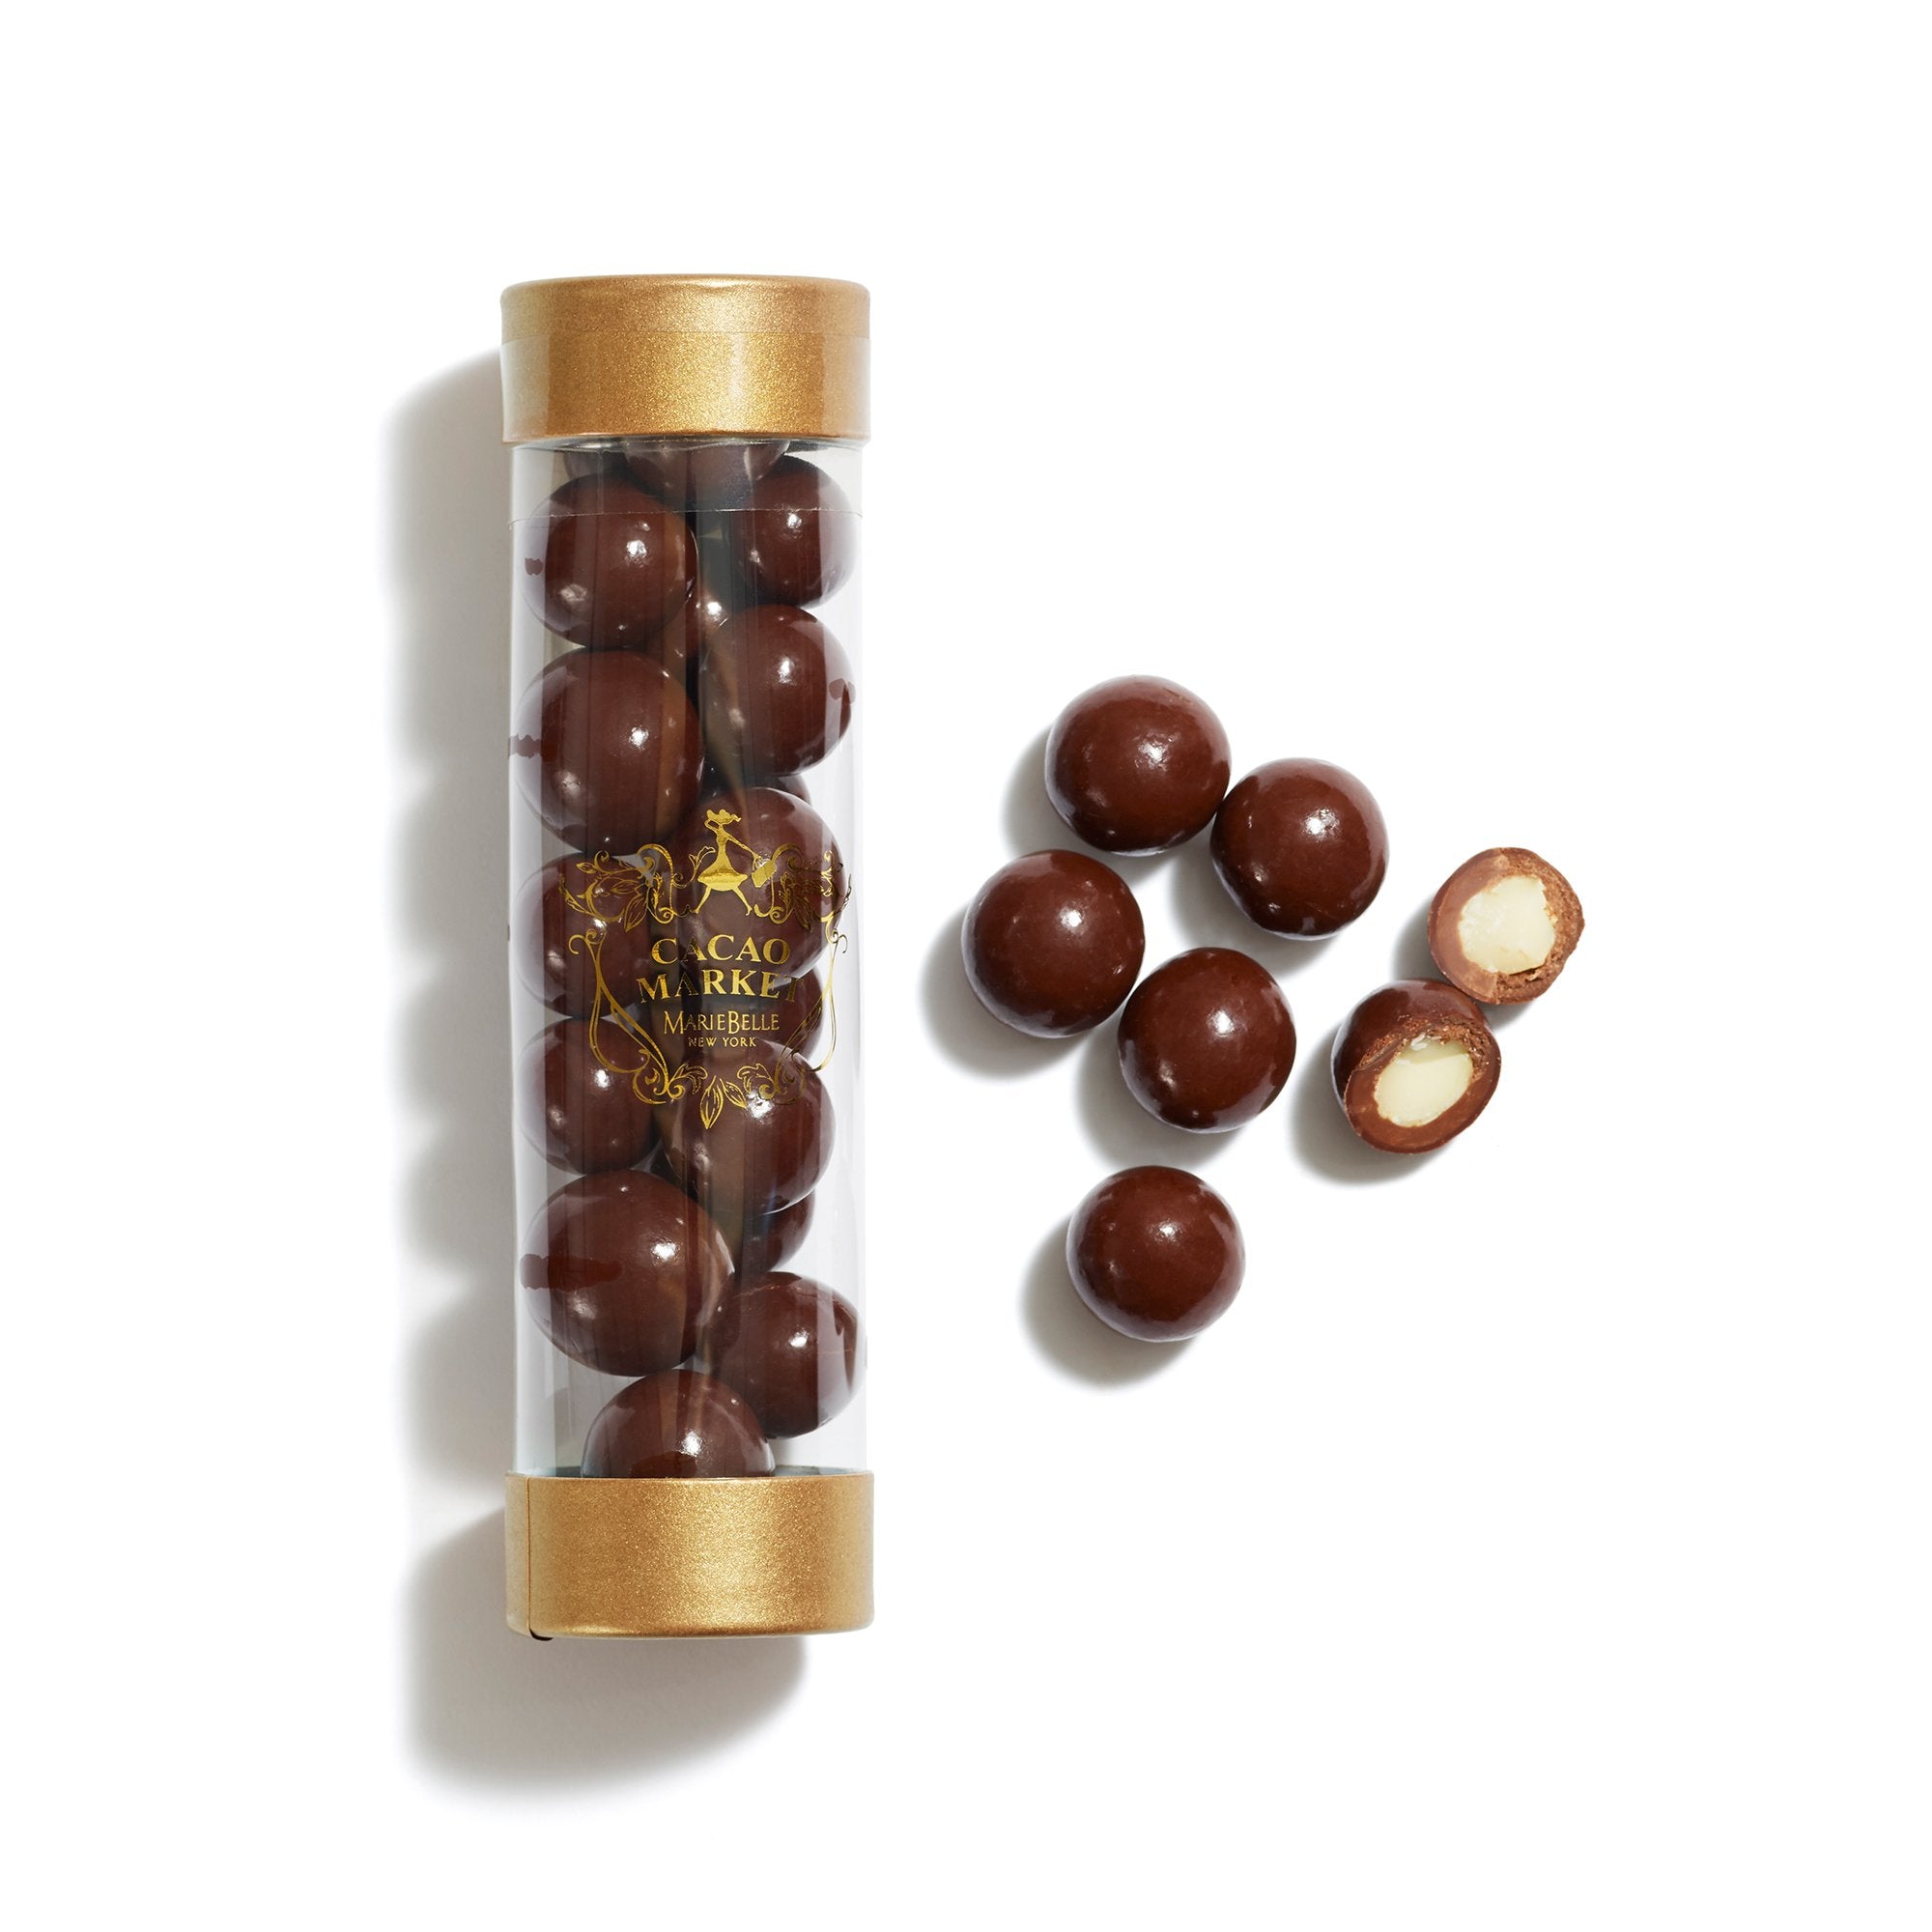 Cylinder Double-dipped Macadamia Nut Chocolate